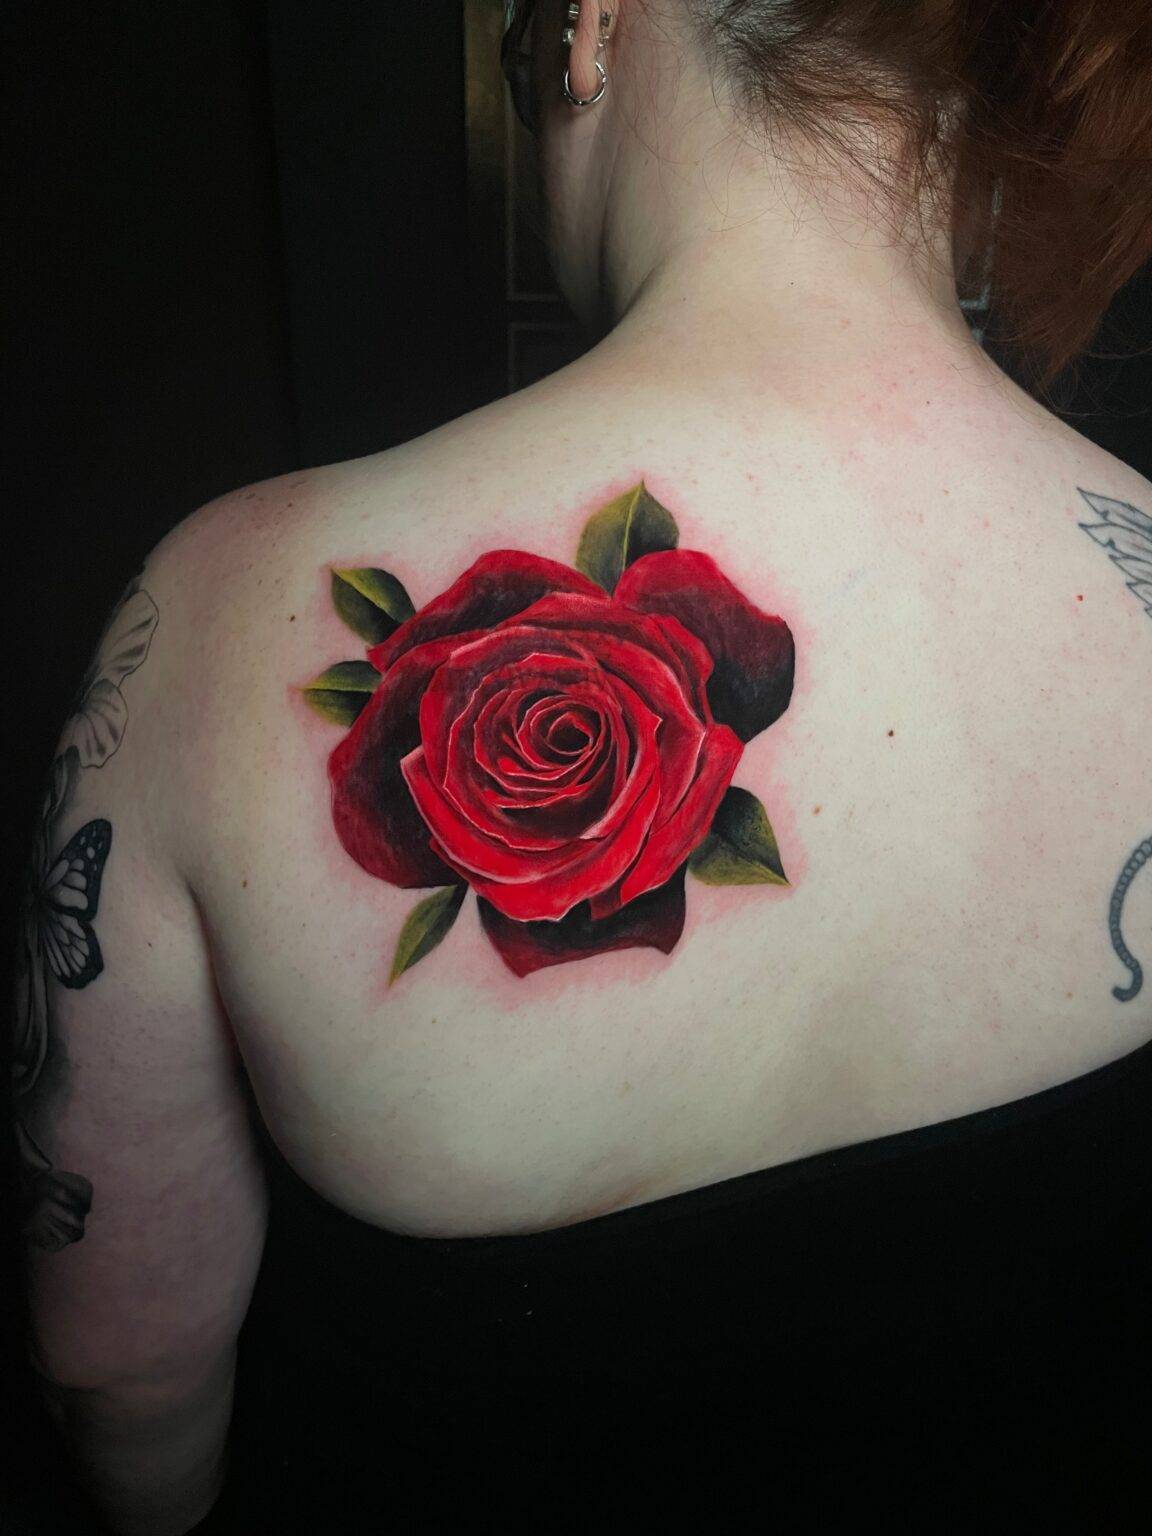 Realistic red rose tattoo - vibrant and detailed